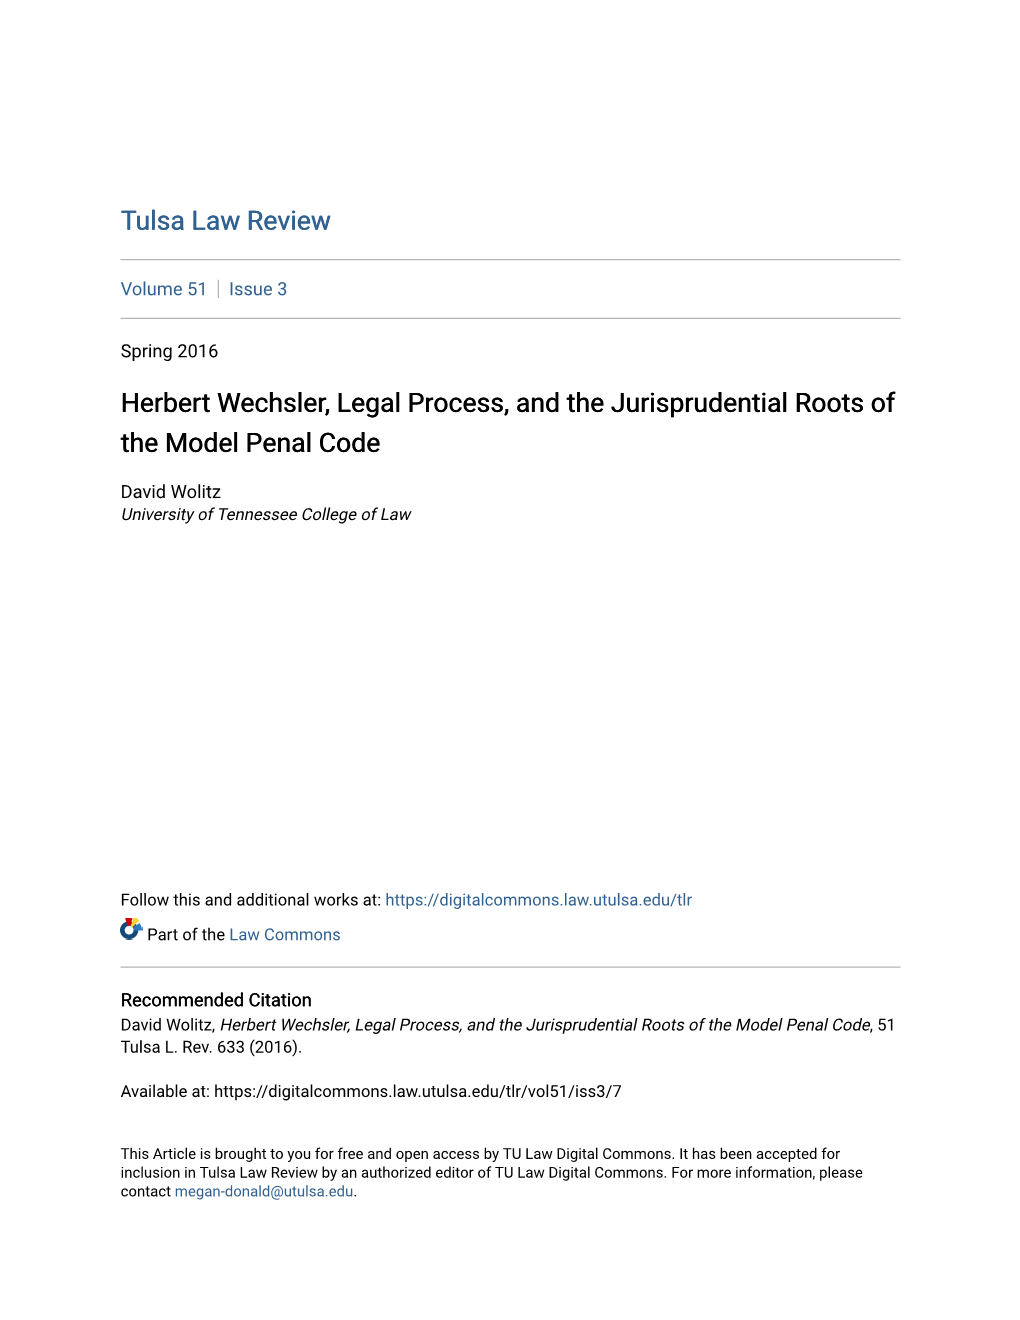 Herbert Wechsler, Legal Process, and the Jurisprudential Roots of the Model Penal Code